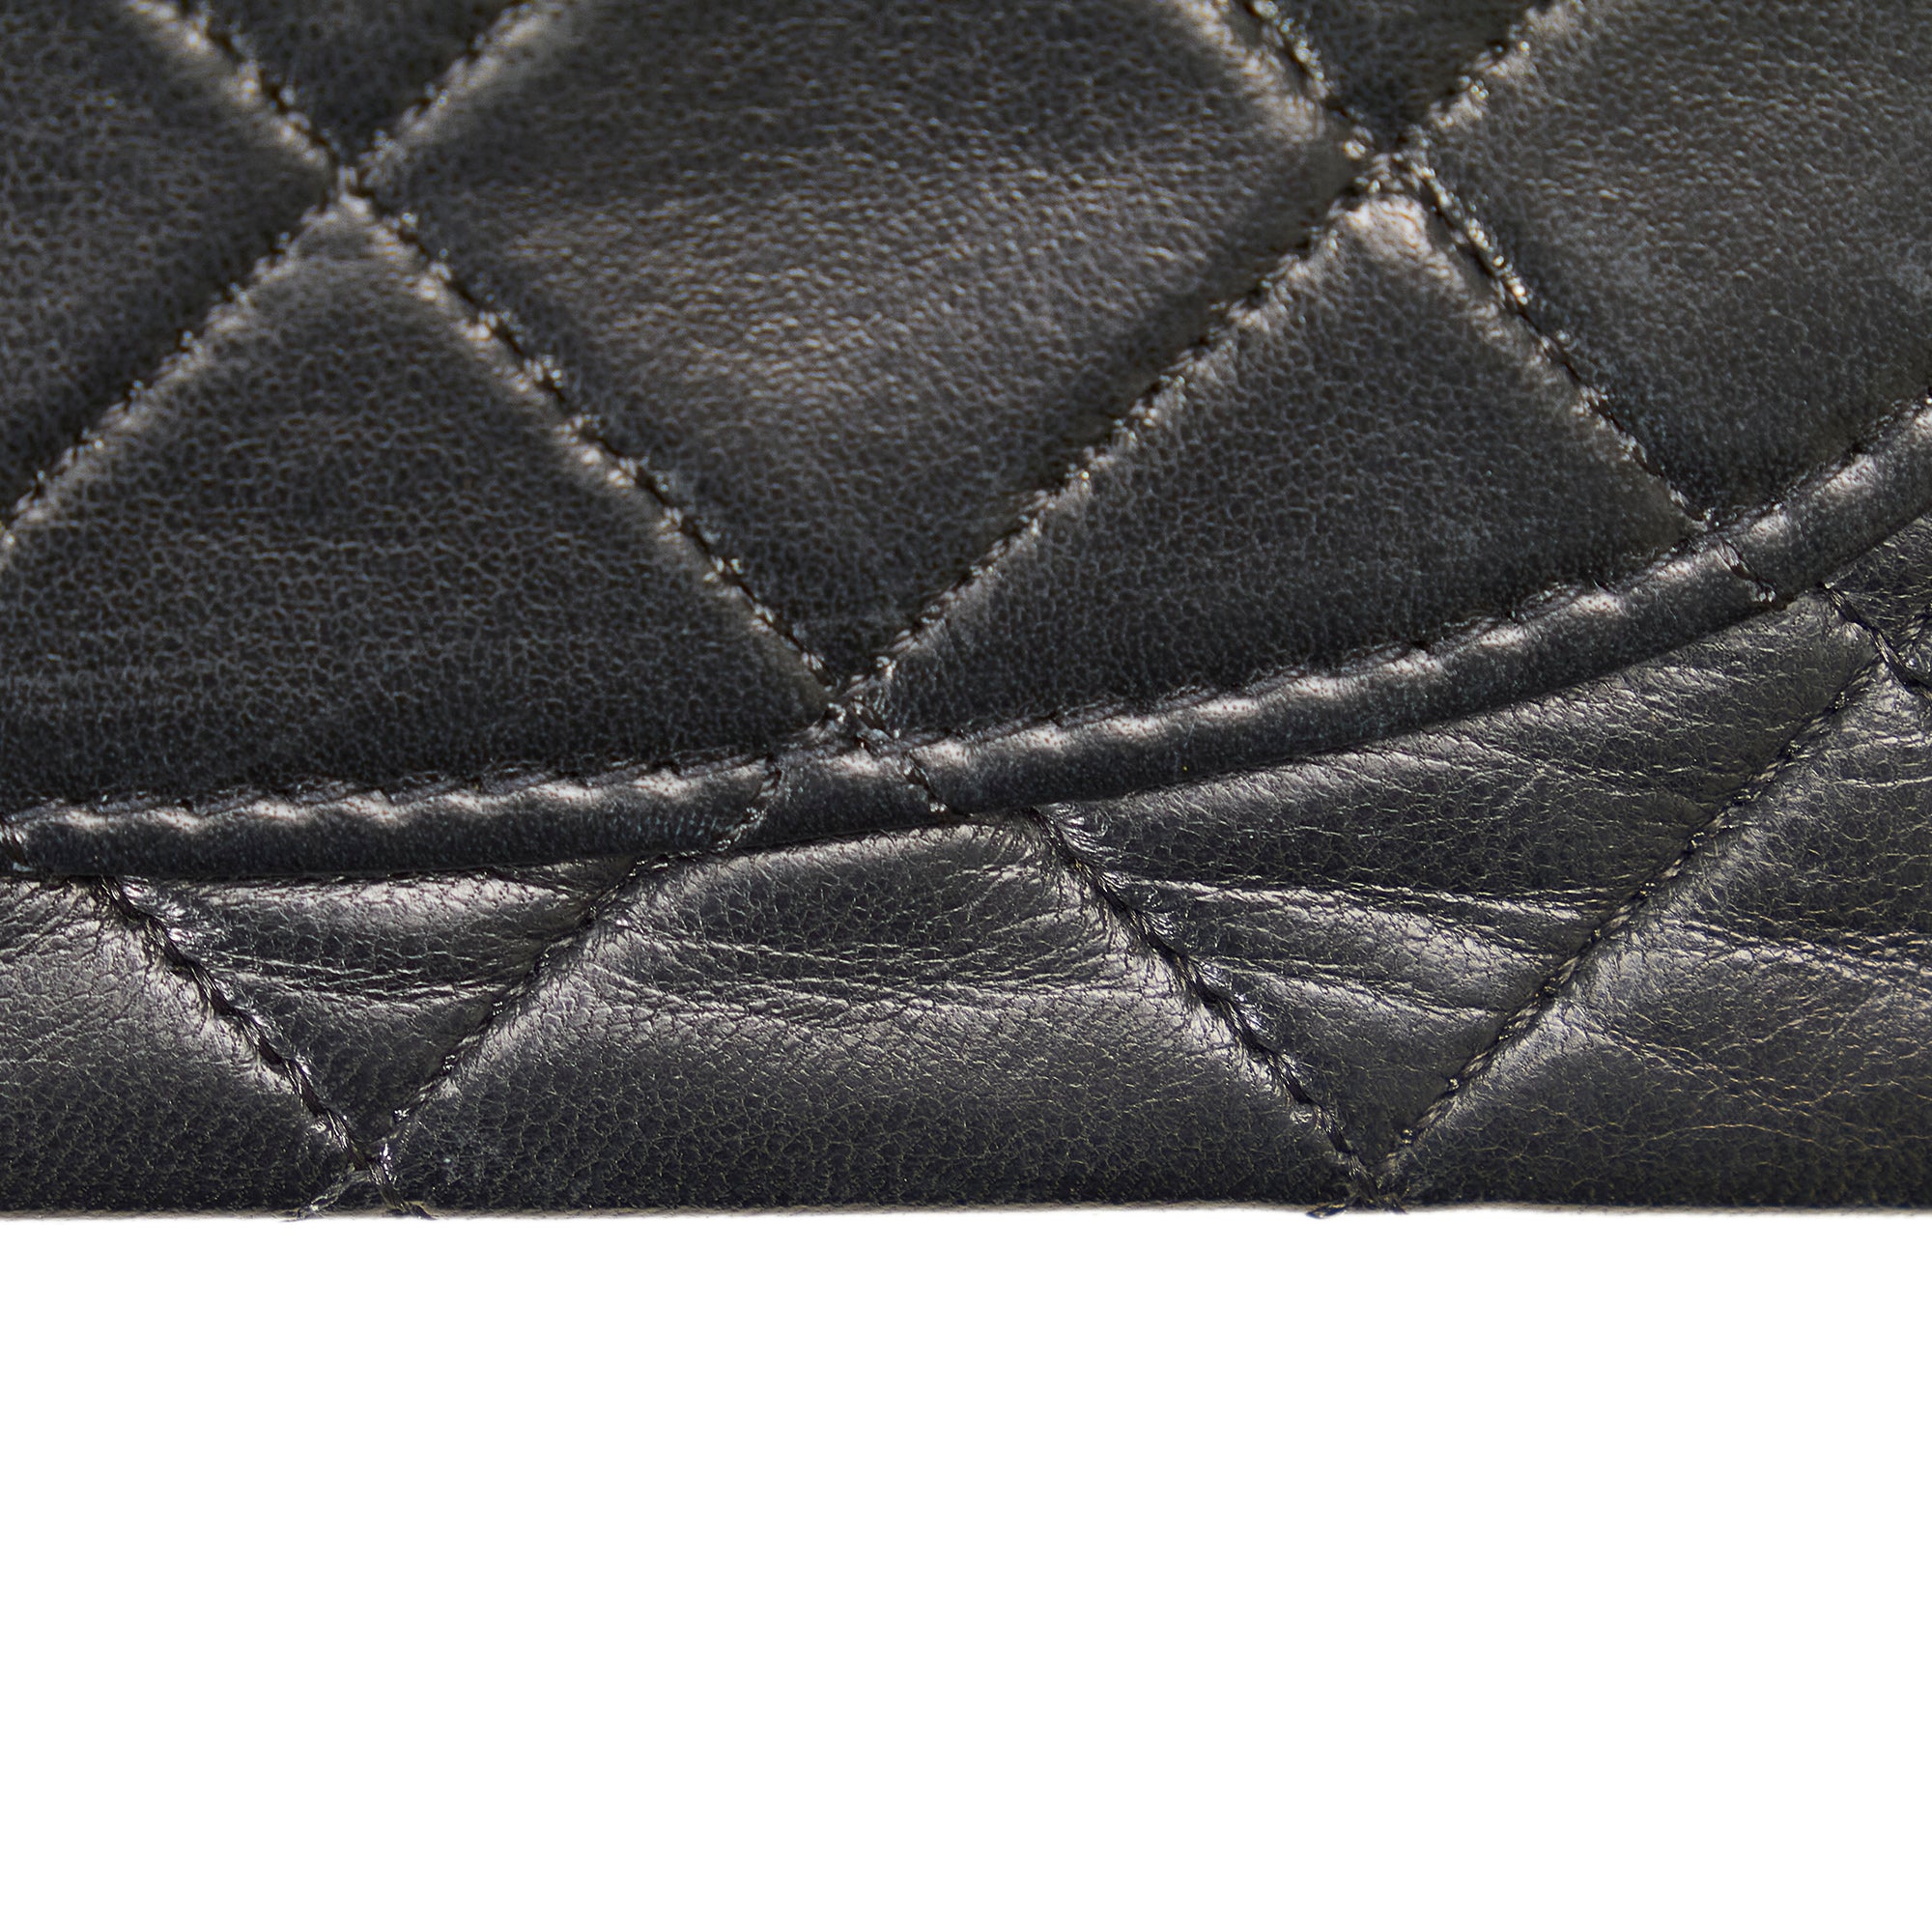 Chanel Black Quilted Lambskin Small Classic Double Flap Rose Gold